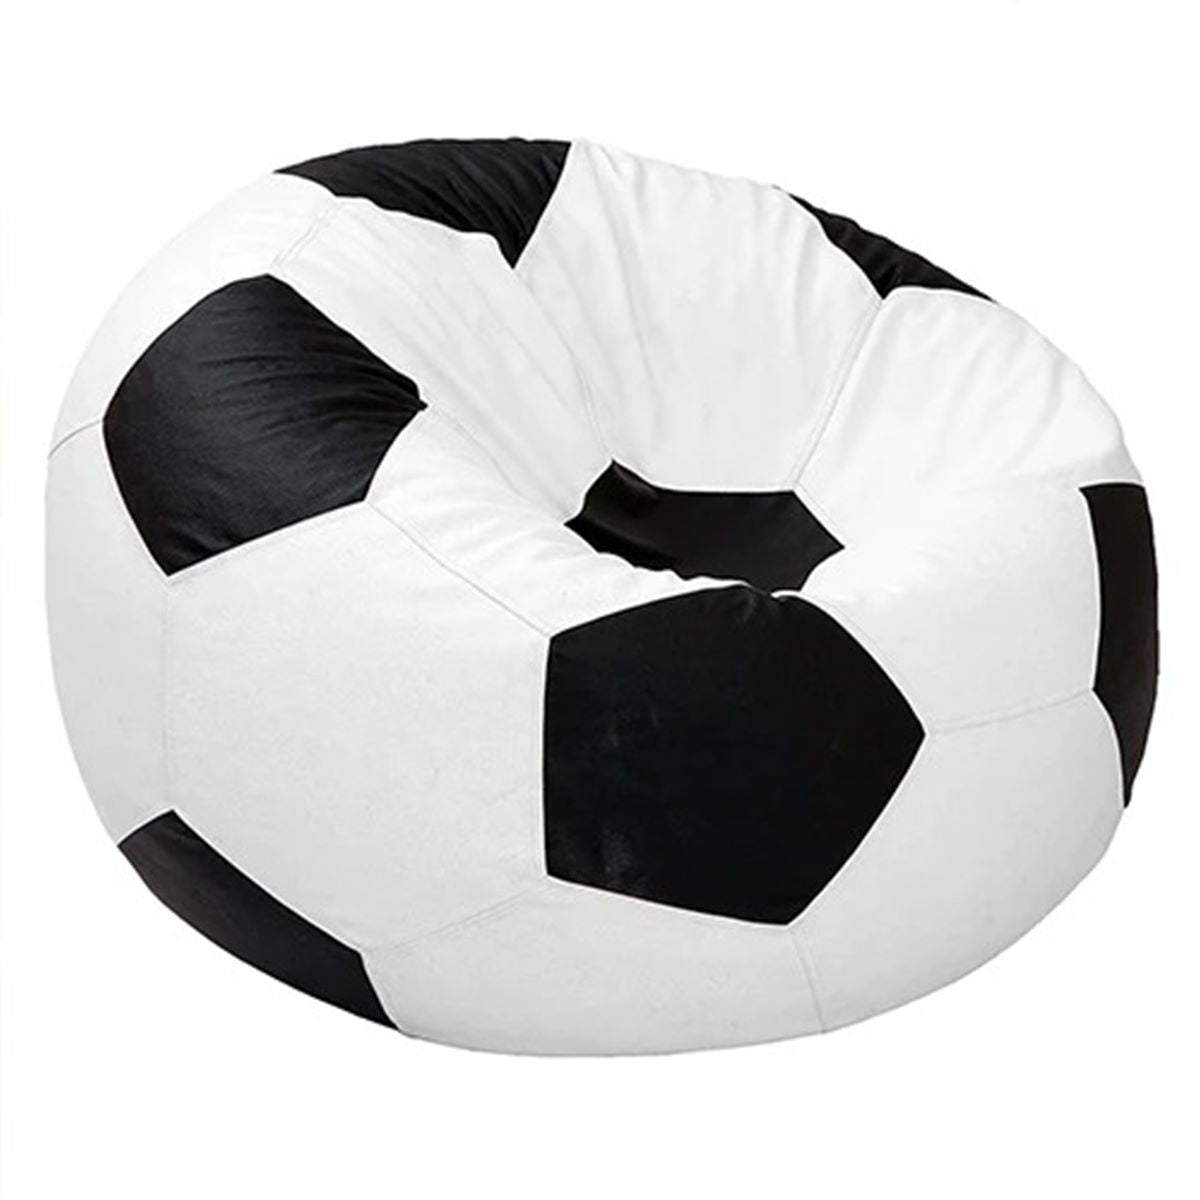 Leatherette Bean Bag Cover, Ideal for Children and Teenagers - Football